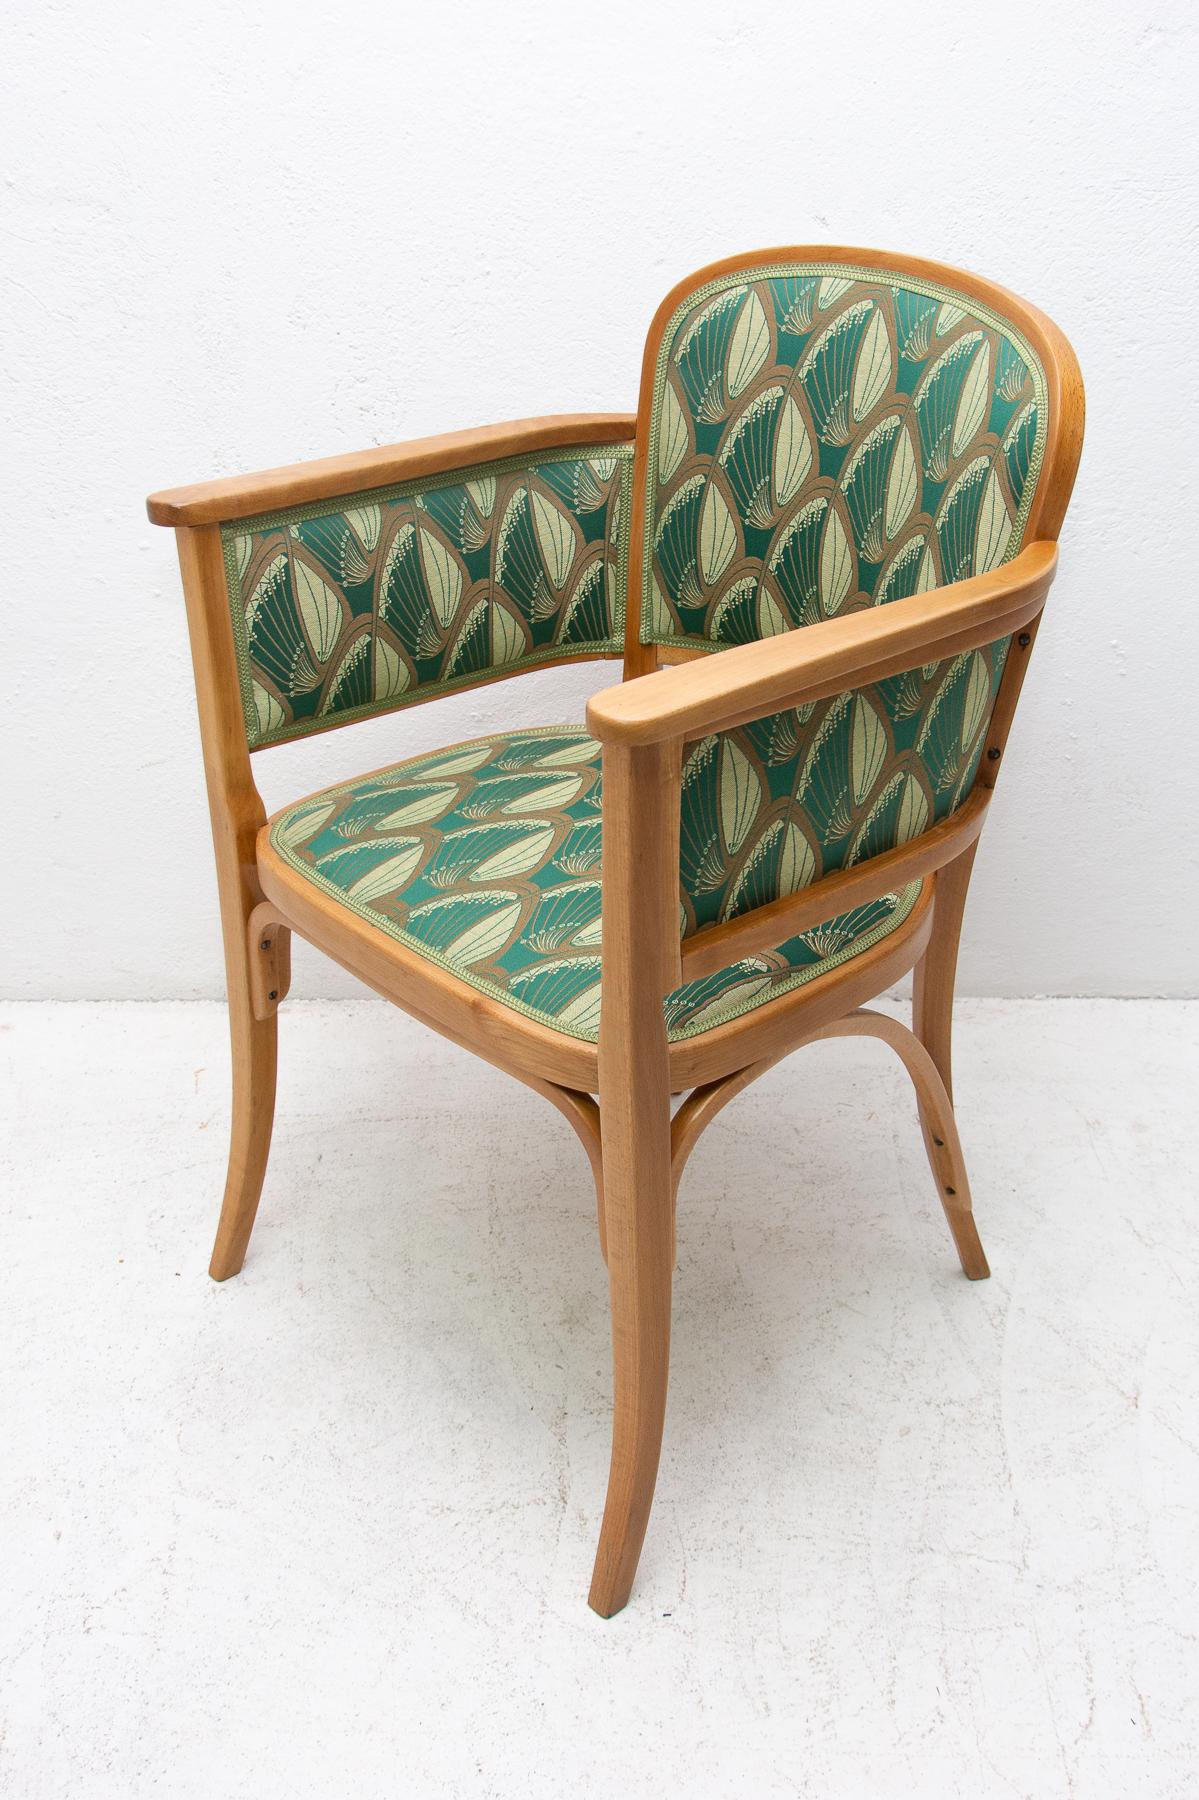 Wood Vienna Secession Office Chair, 1910, Austria, Hungary